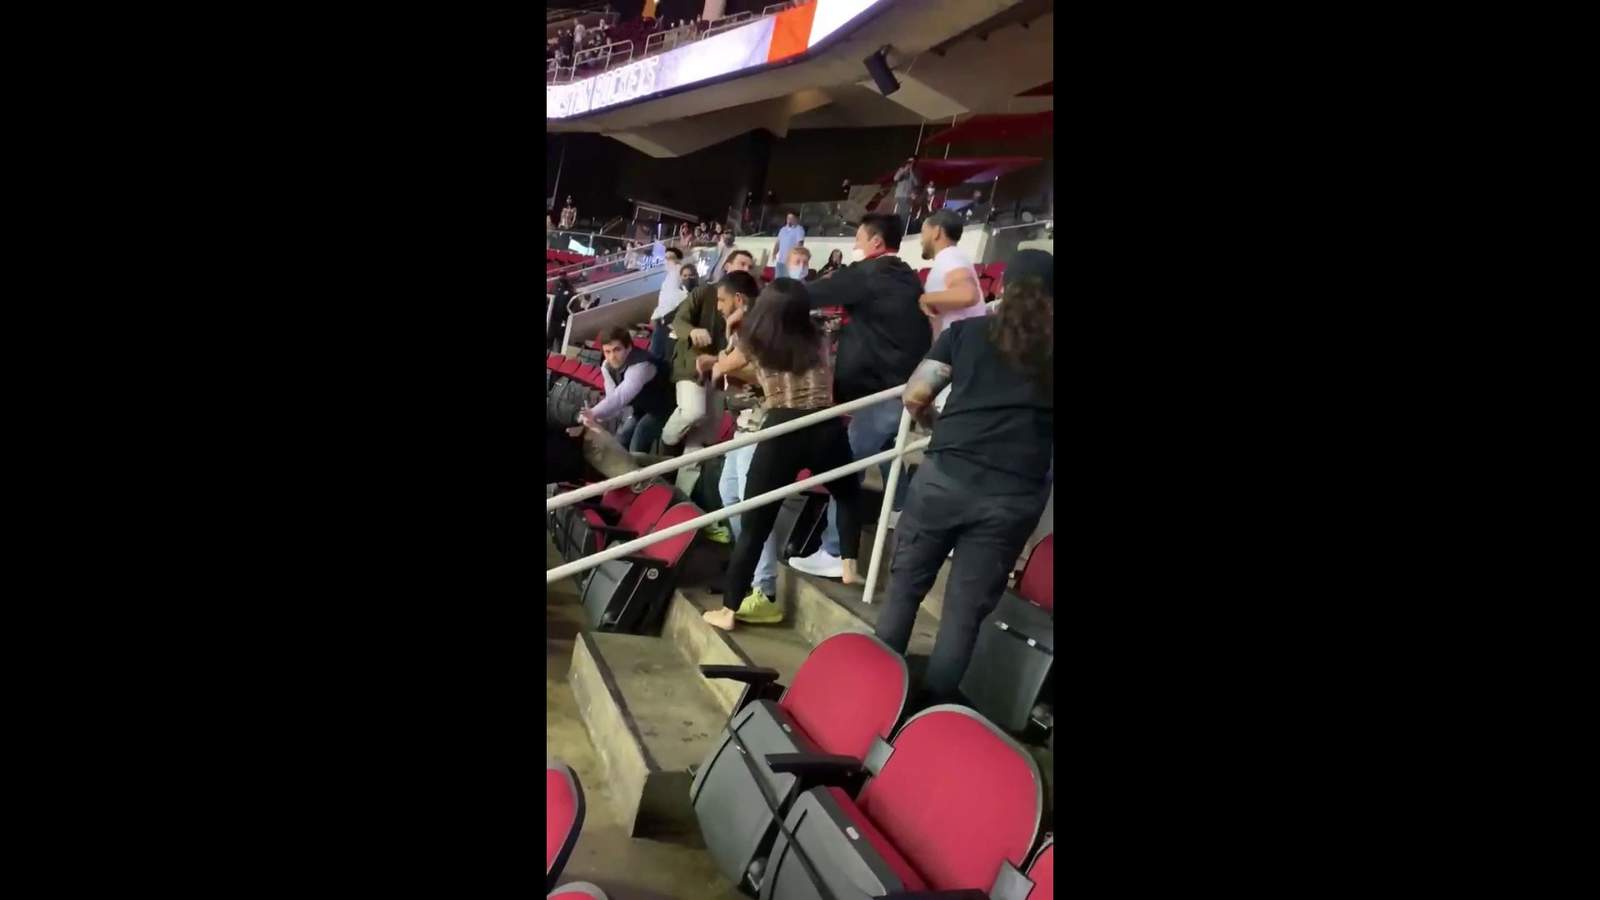 VIDEO: Fight breaks out between Rockets, Spurs fans at game in Houston